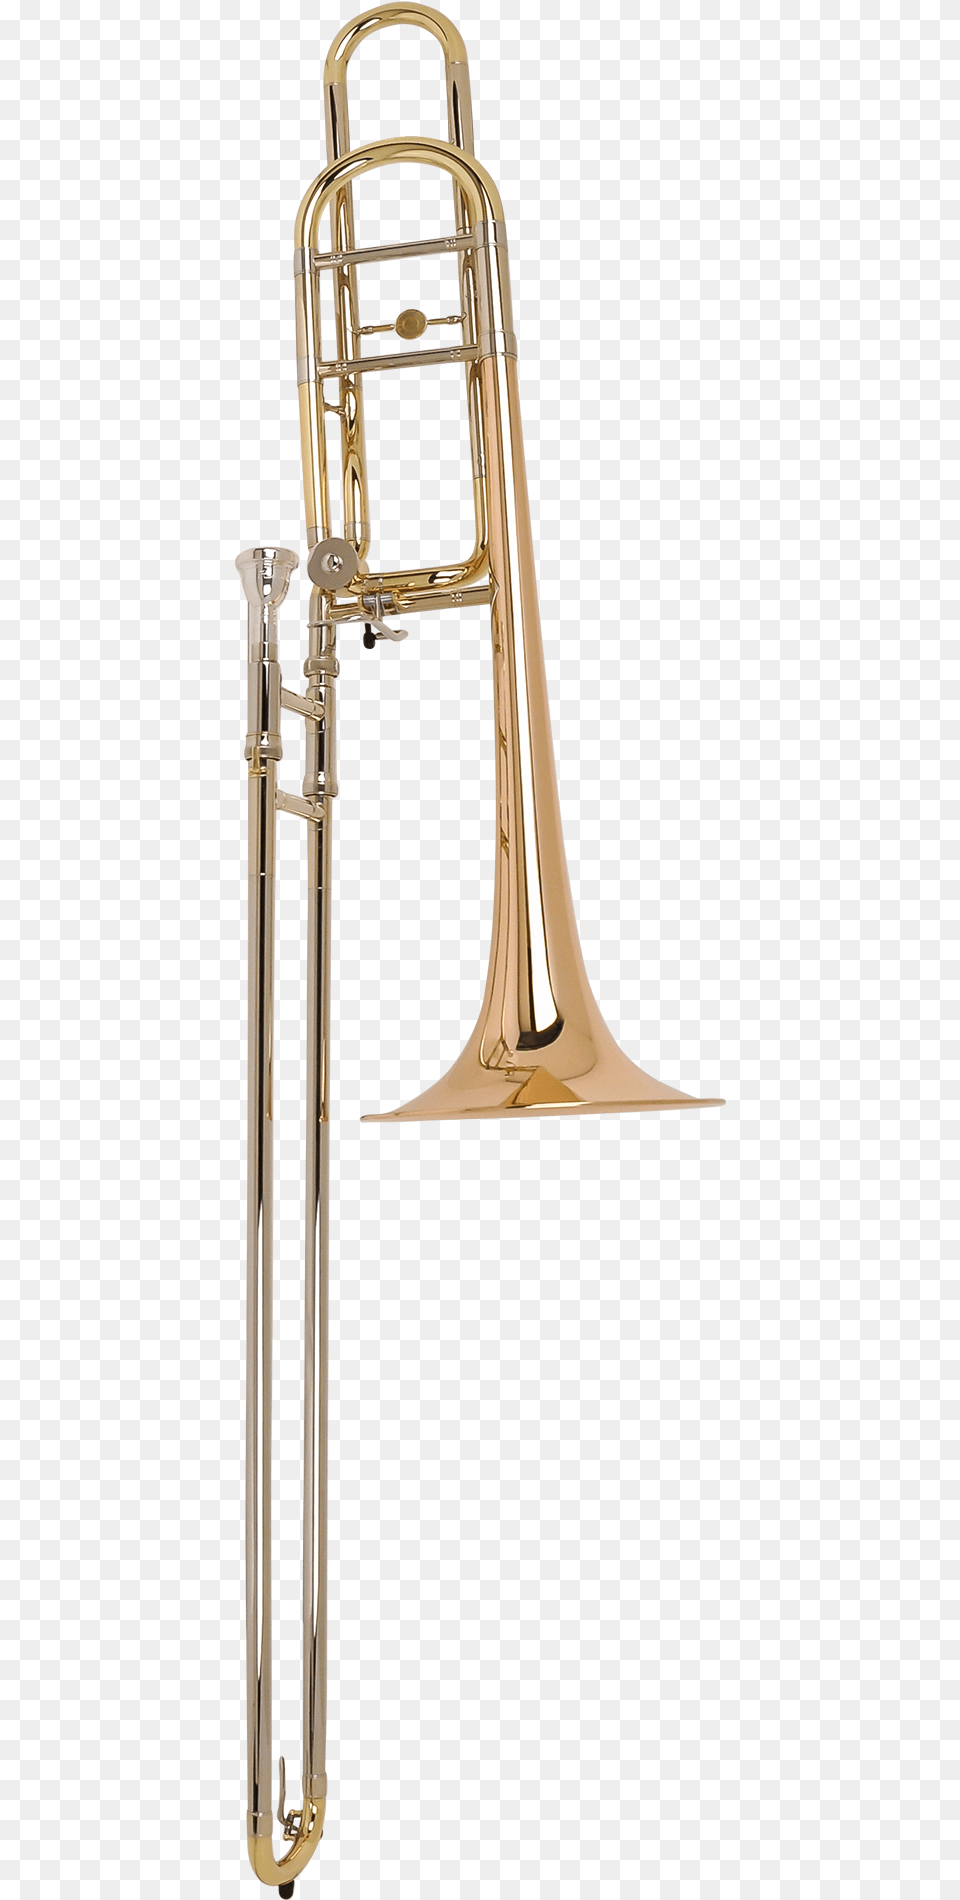 Types Of Trombone, Musical Instrument, Brass Section, Horn, Trumpet Png Image